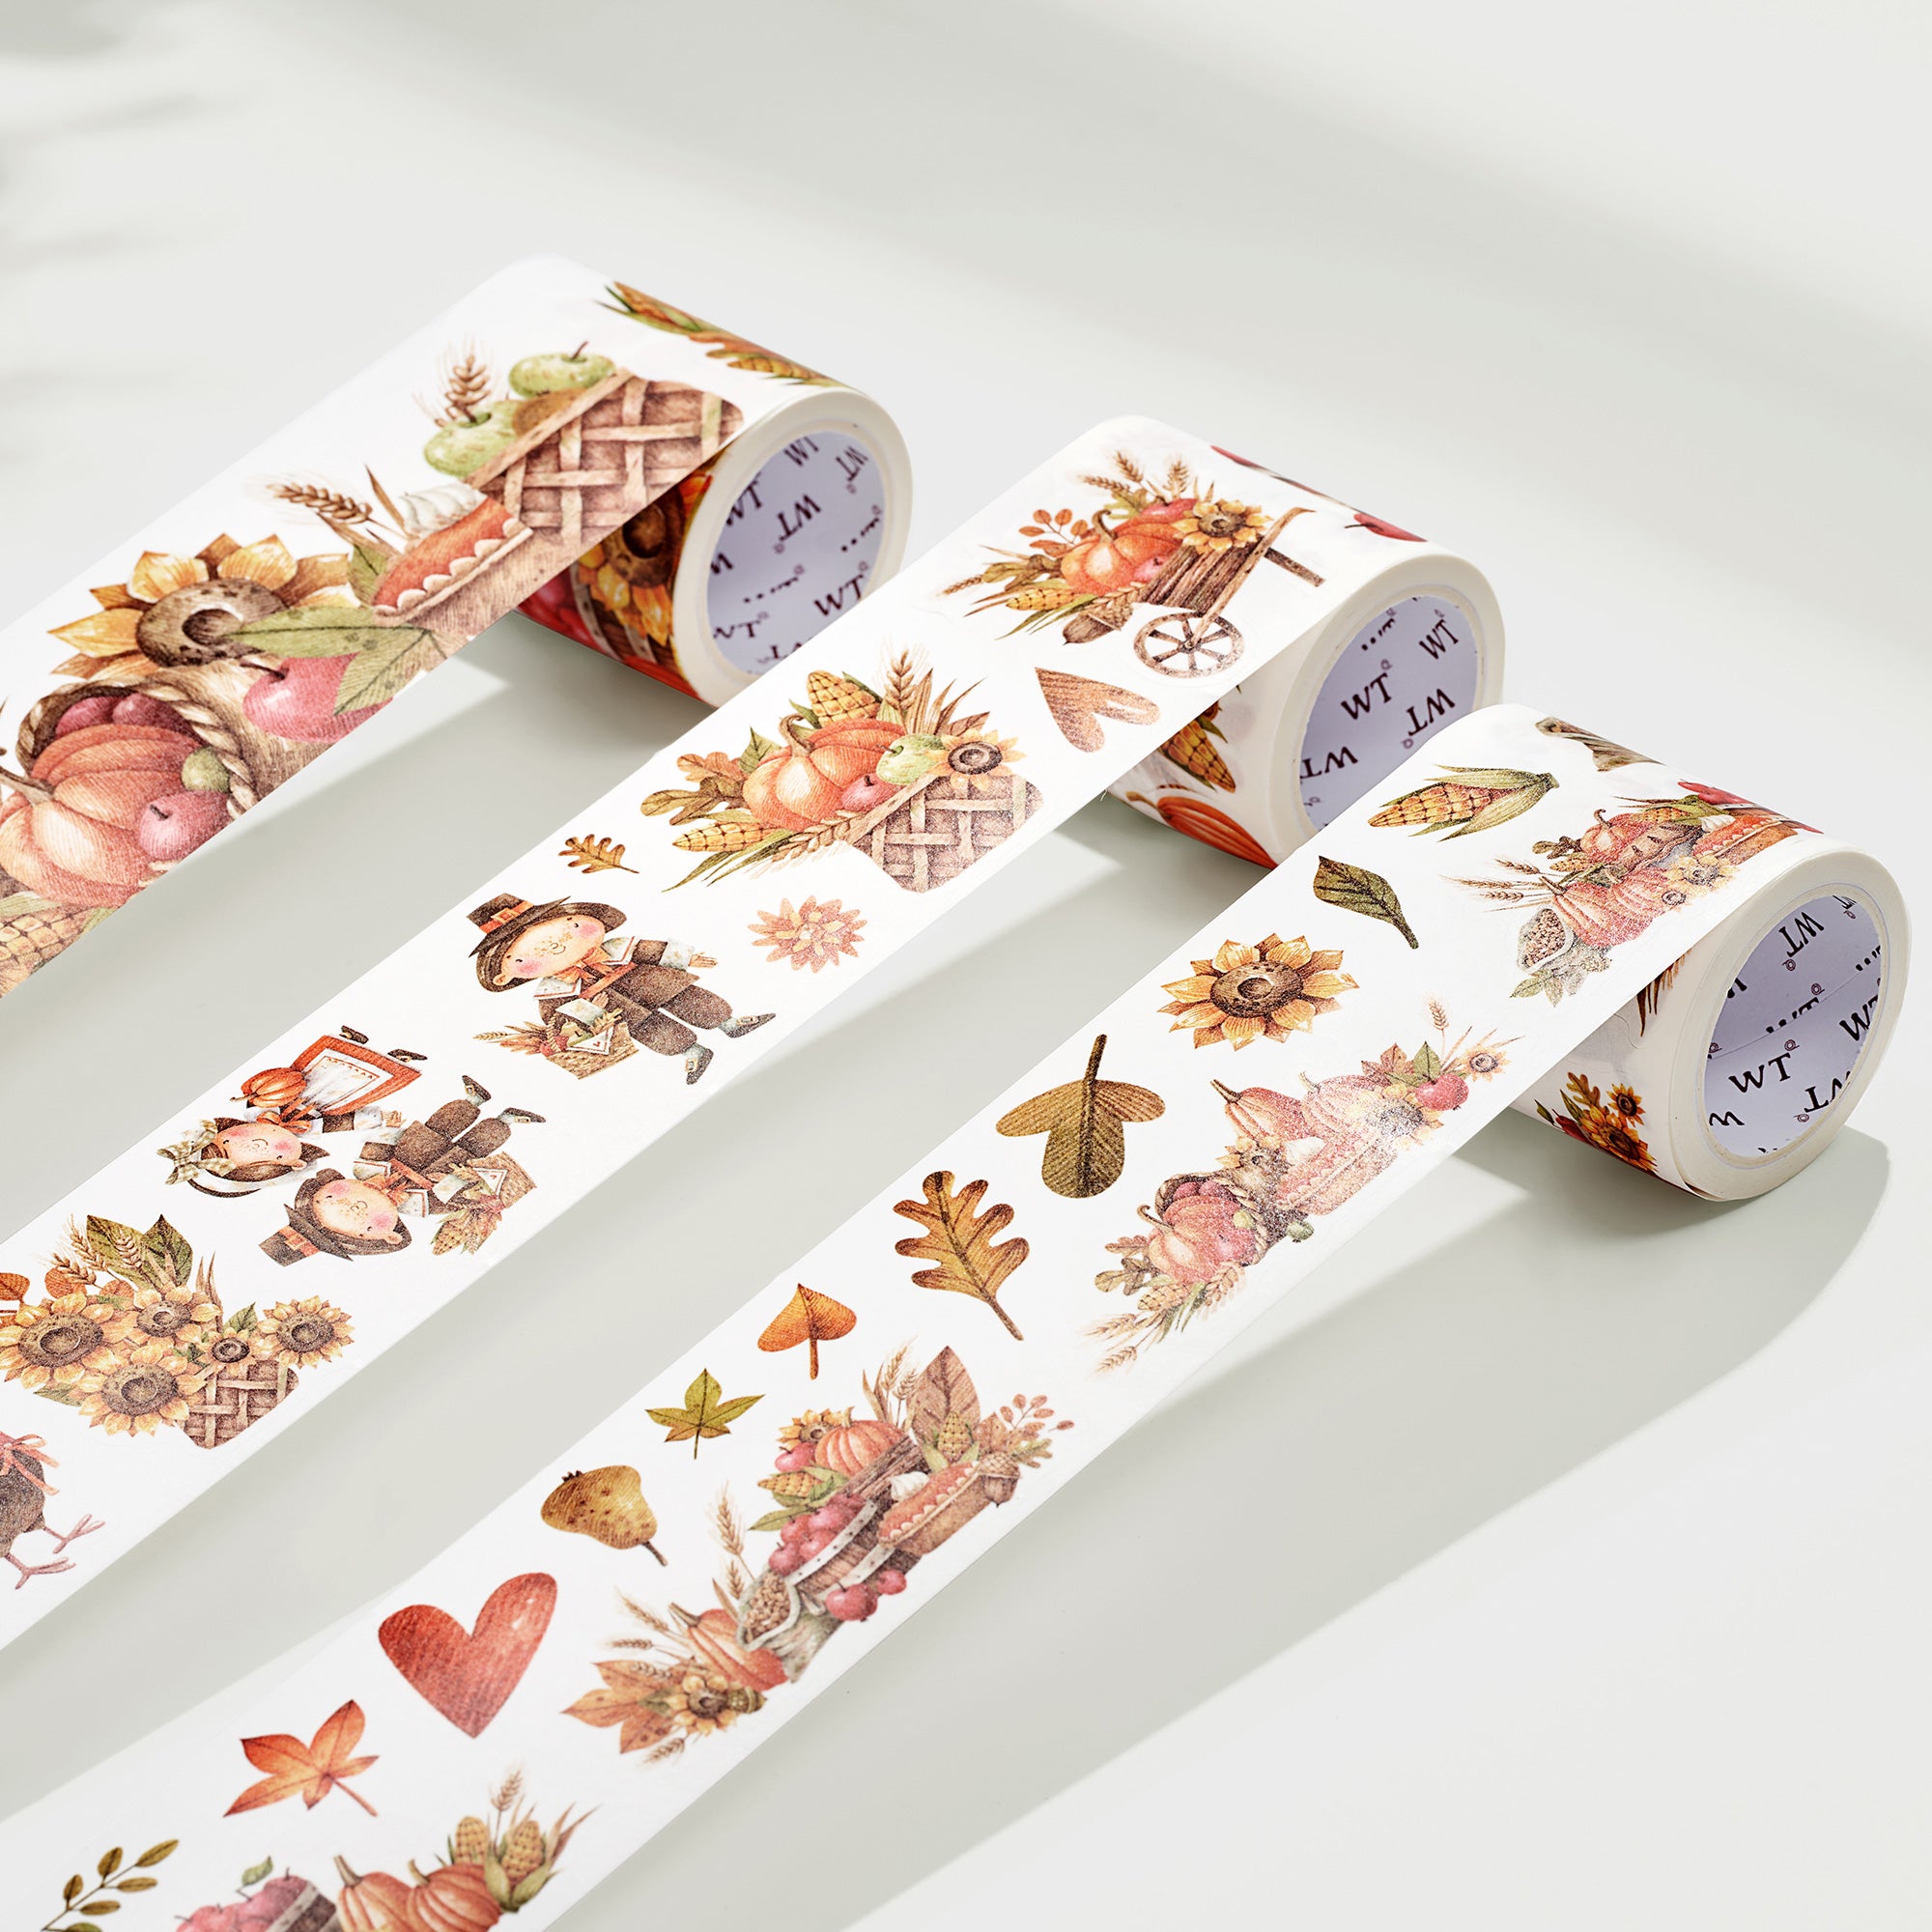 Gobble Galore Washi Tape Sticker Set | The Washi Tape Shop. Beautiful Washi and Decorative Tape For Bullet Journals, Gift Wrapping, Planner Decoration and DIY Projects